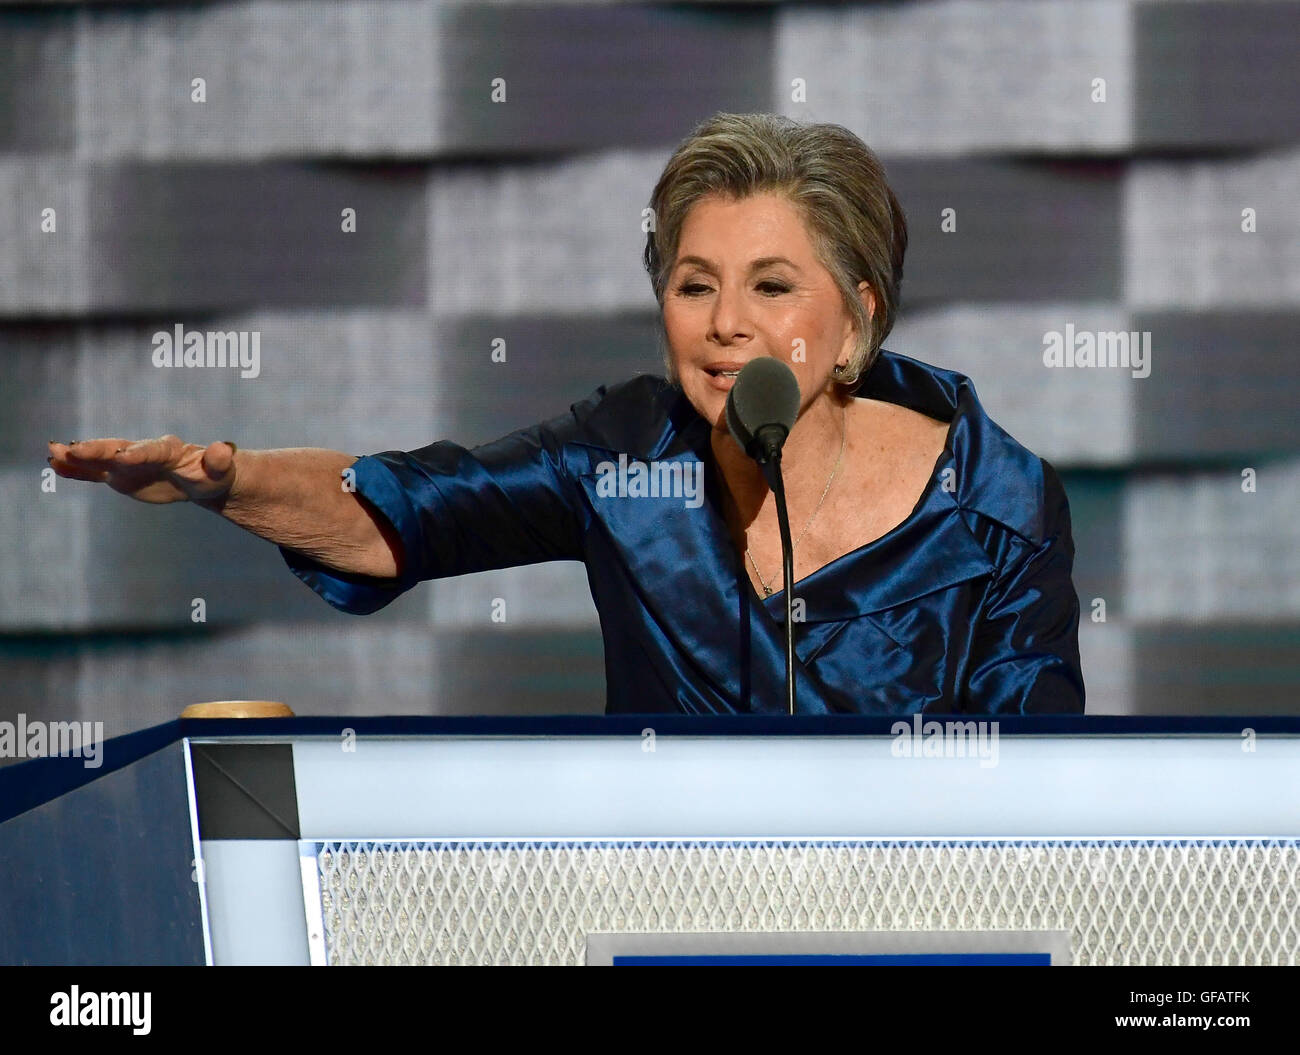 Philadelphia, Us. 26th July, 2016. United States Senator Barbara Boxer (Democrat of California) makes remarks during the second session of the 2016 Democratic National Convention at the Wells Fargo Center in Philadelphia, Pennsylvania on Tuesday, July 26, 2016. Credit: Ron Sachs/CNP (RESTRICTION: NO New York or New Jersey Newspapers or newspapers within a 75 mile radius of New York City) - NO WIRE SERVICE - © dpa/Alamy Live News Stock Photo